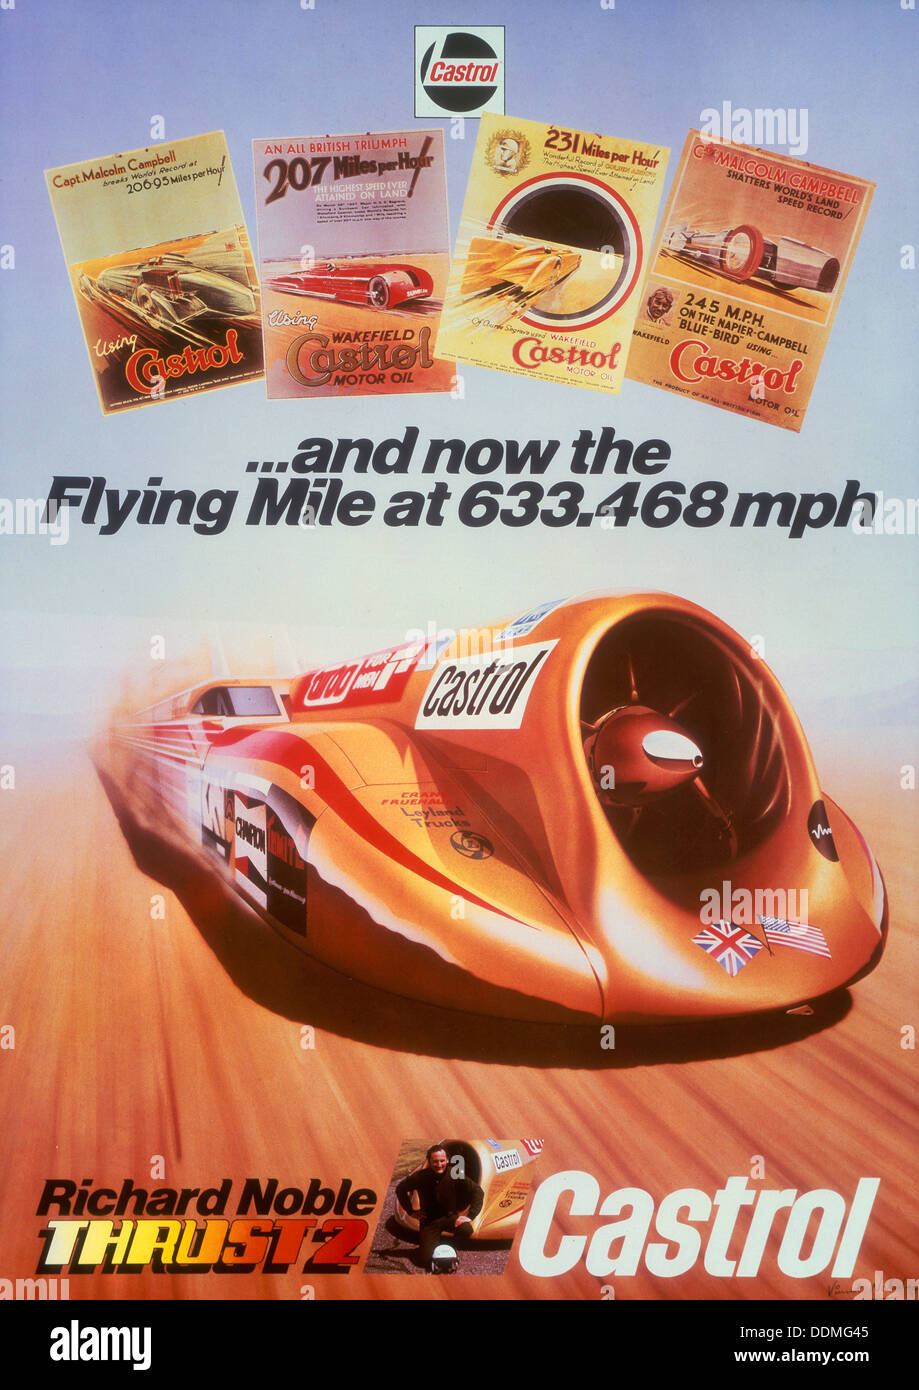 Poster advertising Castrol, featuring Thrust 2 and Richard Noble, c1983. Artist: Unknown Stock Photo